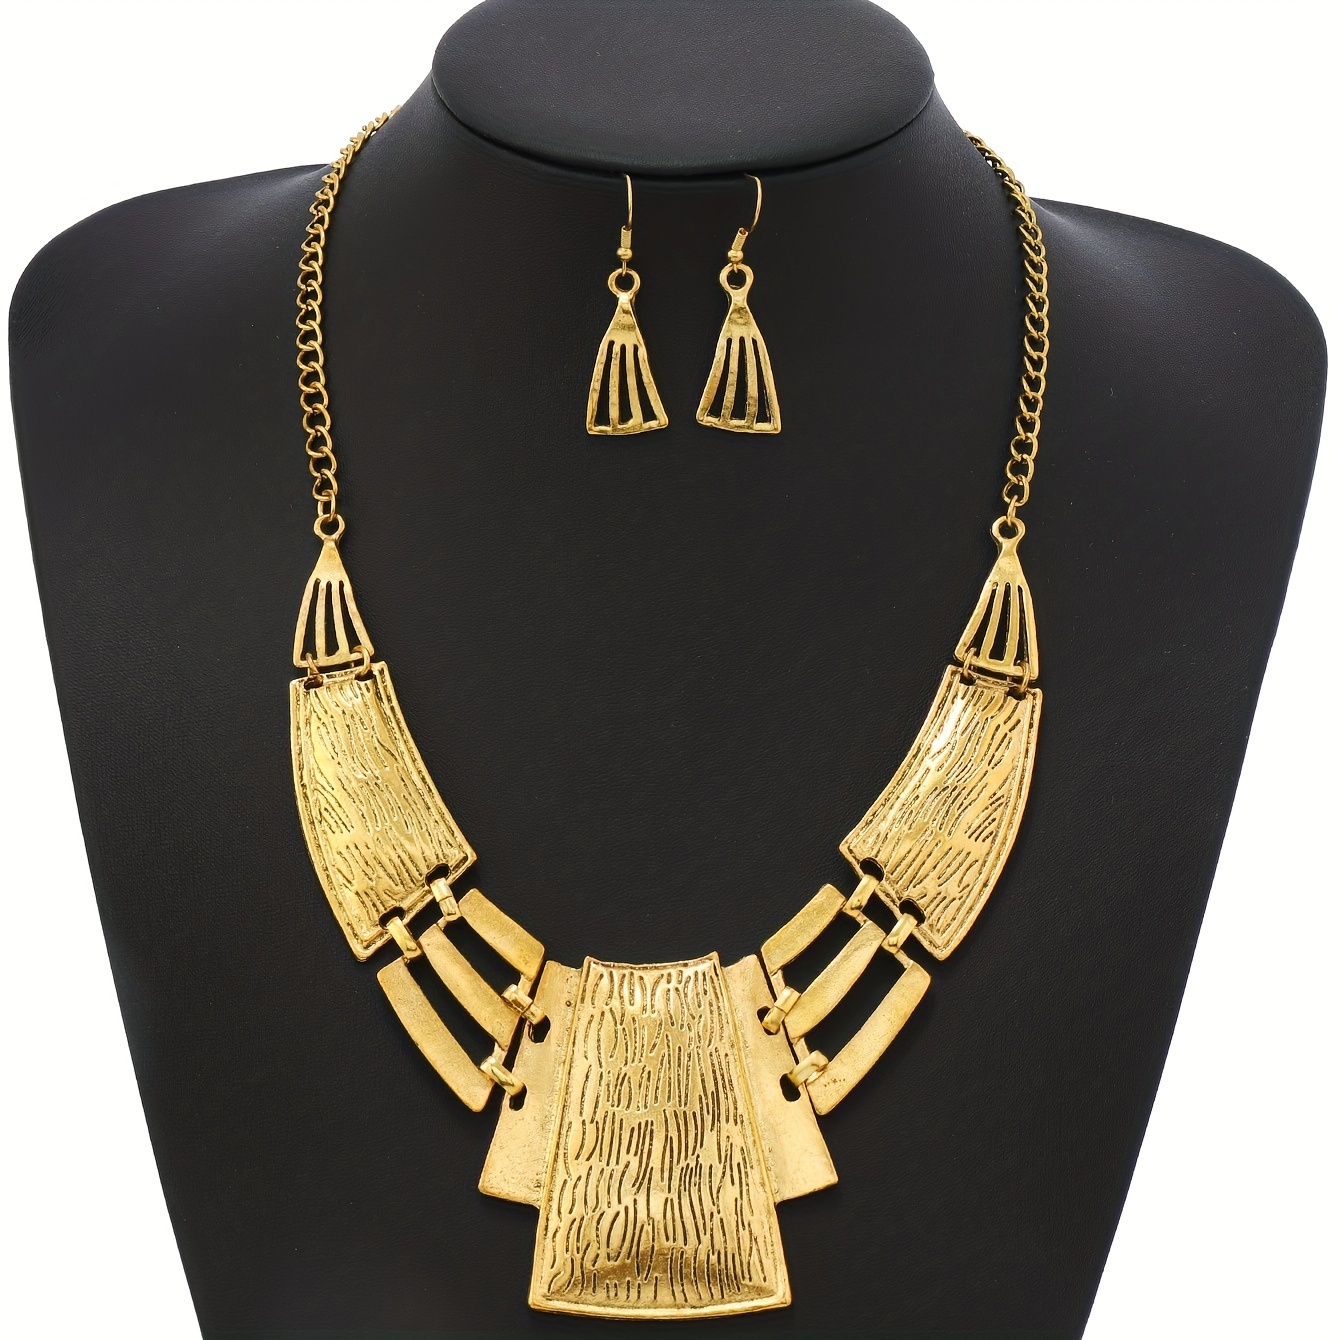 

3pcs Earrings Plus Necklace Vintage Jewelry Set Geometric Design Silvery Or Golden Make Your Call Stunning Party Accessories